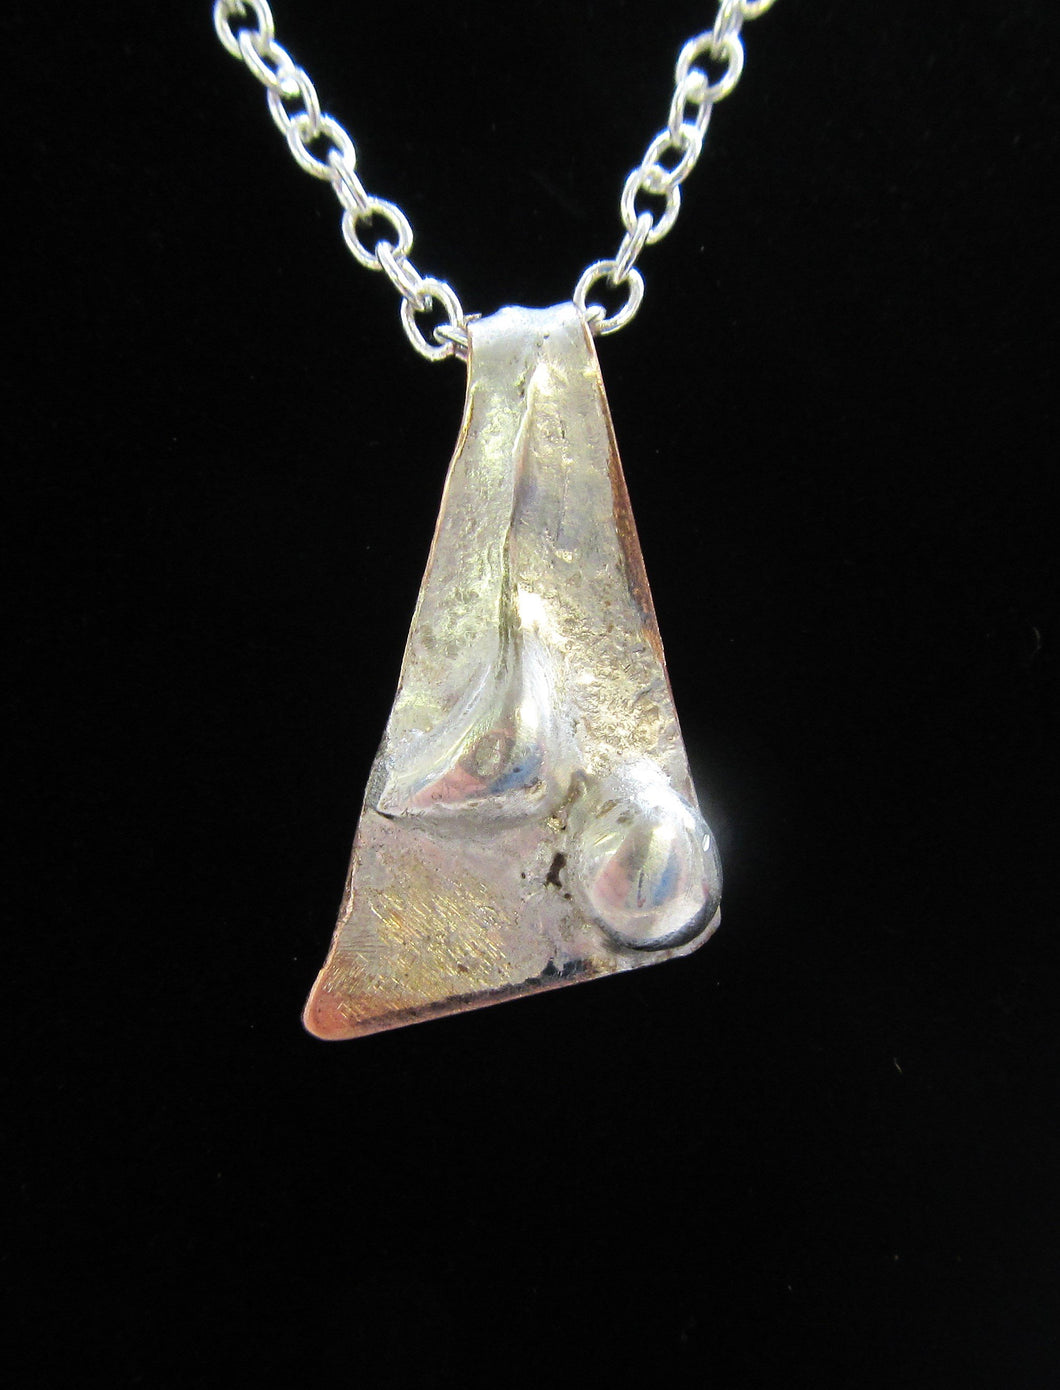 Handcrafted reticulated copper and 925 silver pendant and chain